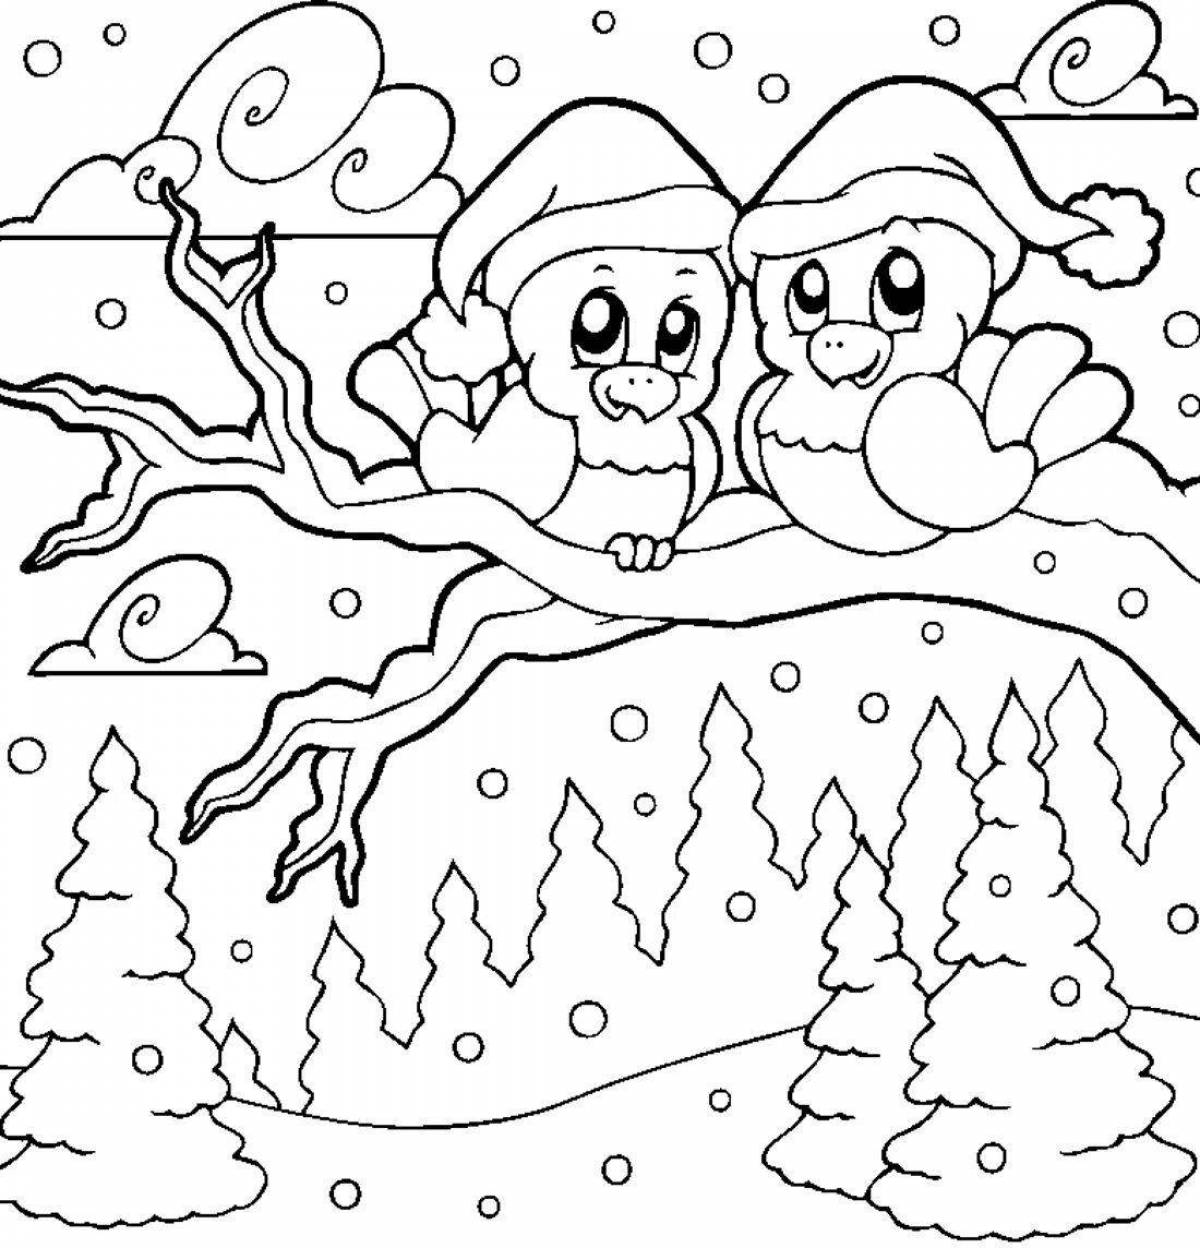 Sublime coloring page drawing winter